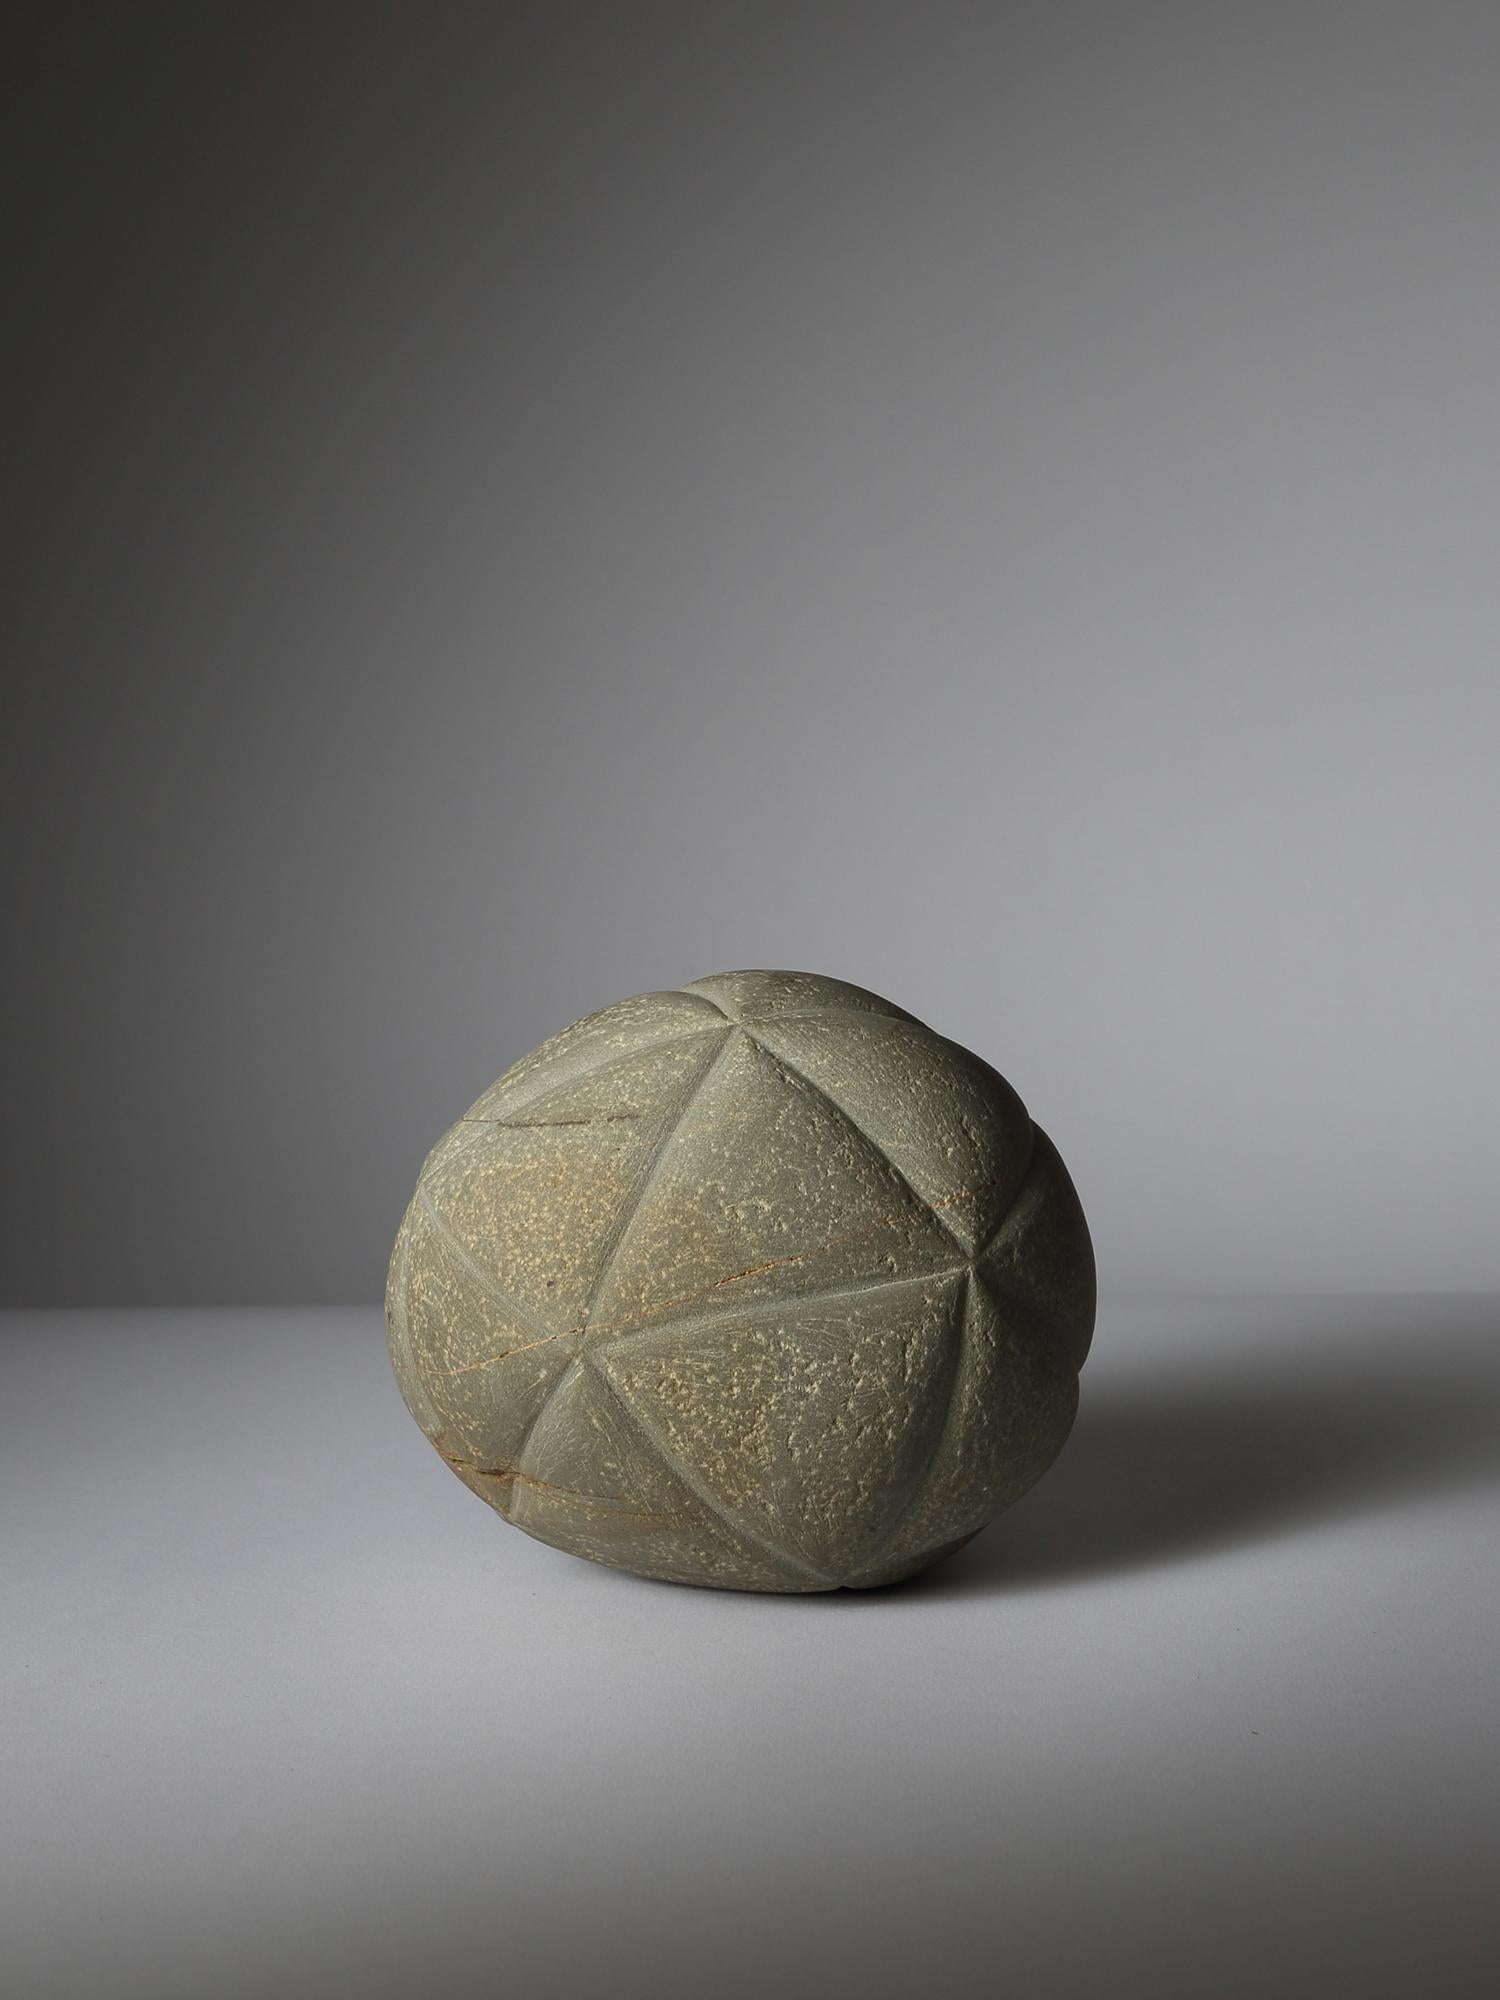 Stone Maquette I - Sculpture by Peter Randall-Page